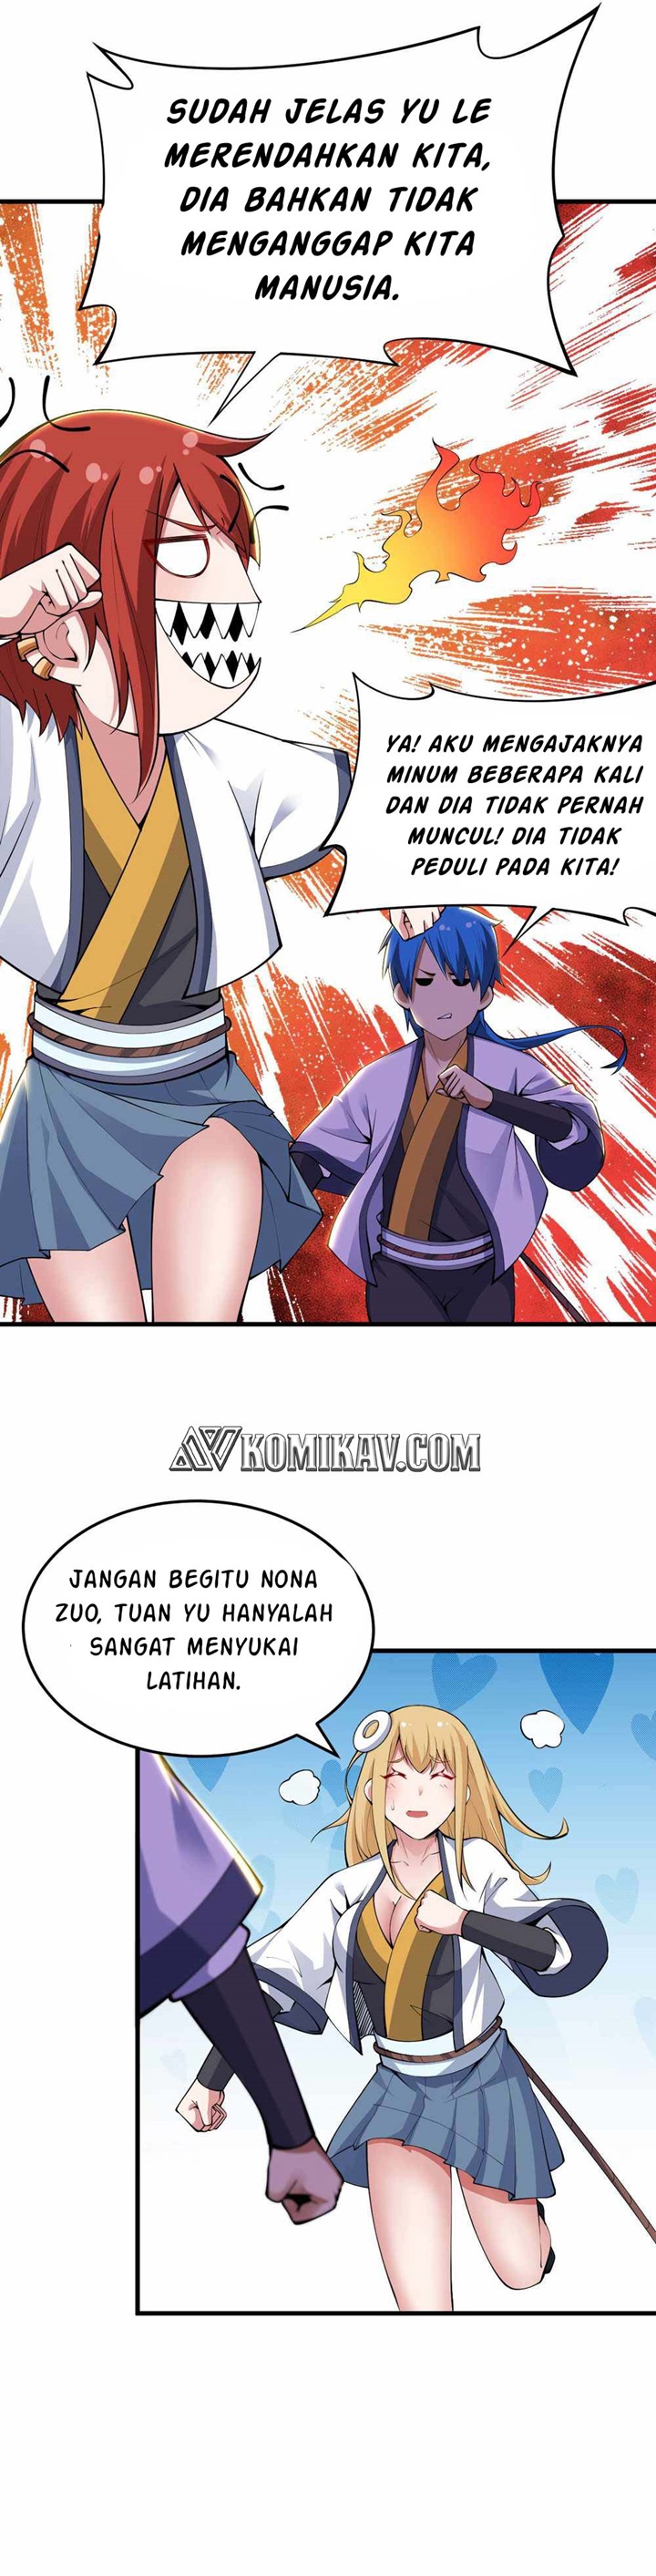 Dilarang COPAS - situs resmi www.mangacanblog.com - Komik i just want to be beaten to death by everyone 036 - chapter 36 37 Indonesia i just want to be beaten to death by everyone 036 - chapter 36 Terbaru 2|Baca Manga Komik Indonesia|Mangacan